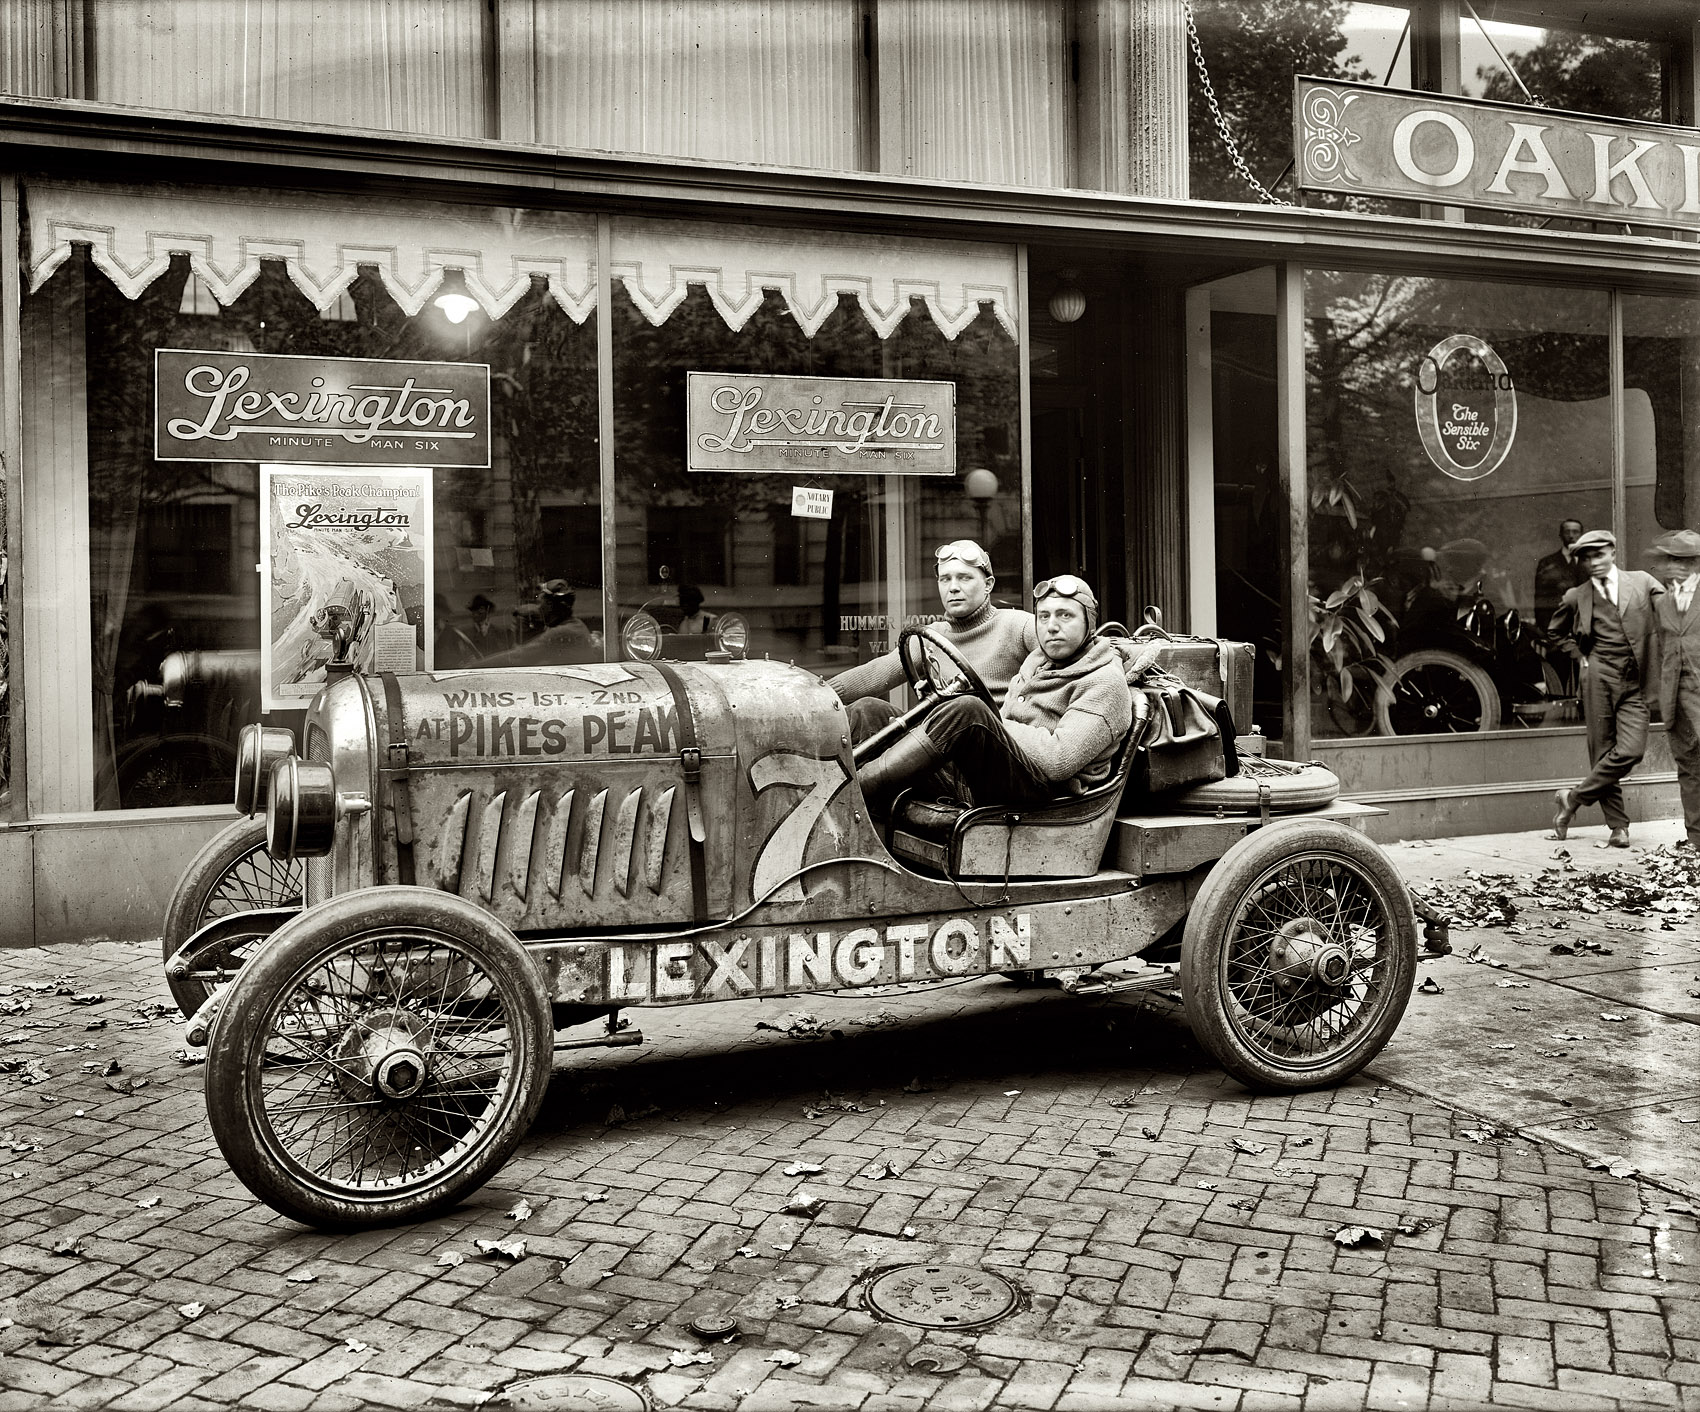 1920 or 1921. "Lexington. Pike's Peak car." One of two Lexington racecars that placed first and second in the 1920 Pike's Peak hill climb seen at 1020 Connecticut Avenue N.W., the Washington branch of Hummer Motor Sales Company. E. Adie Hummer, Manager. View full size. National Photo Company glass negative.